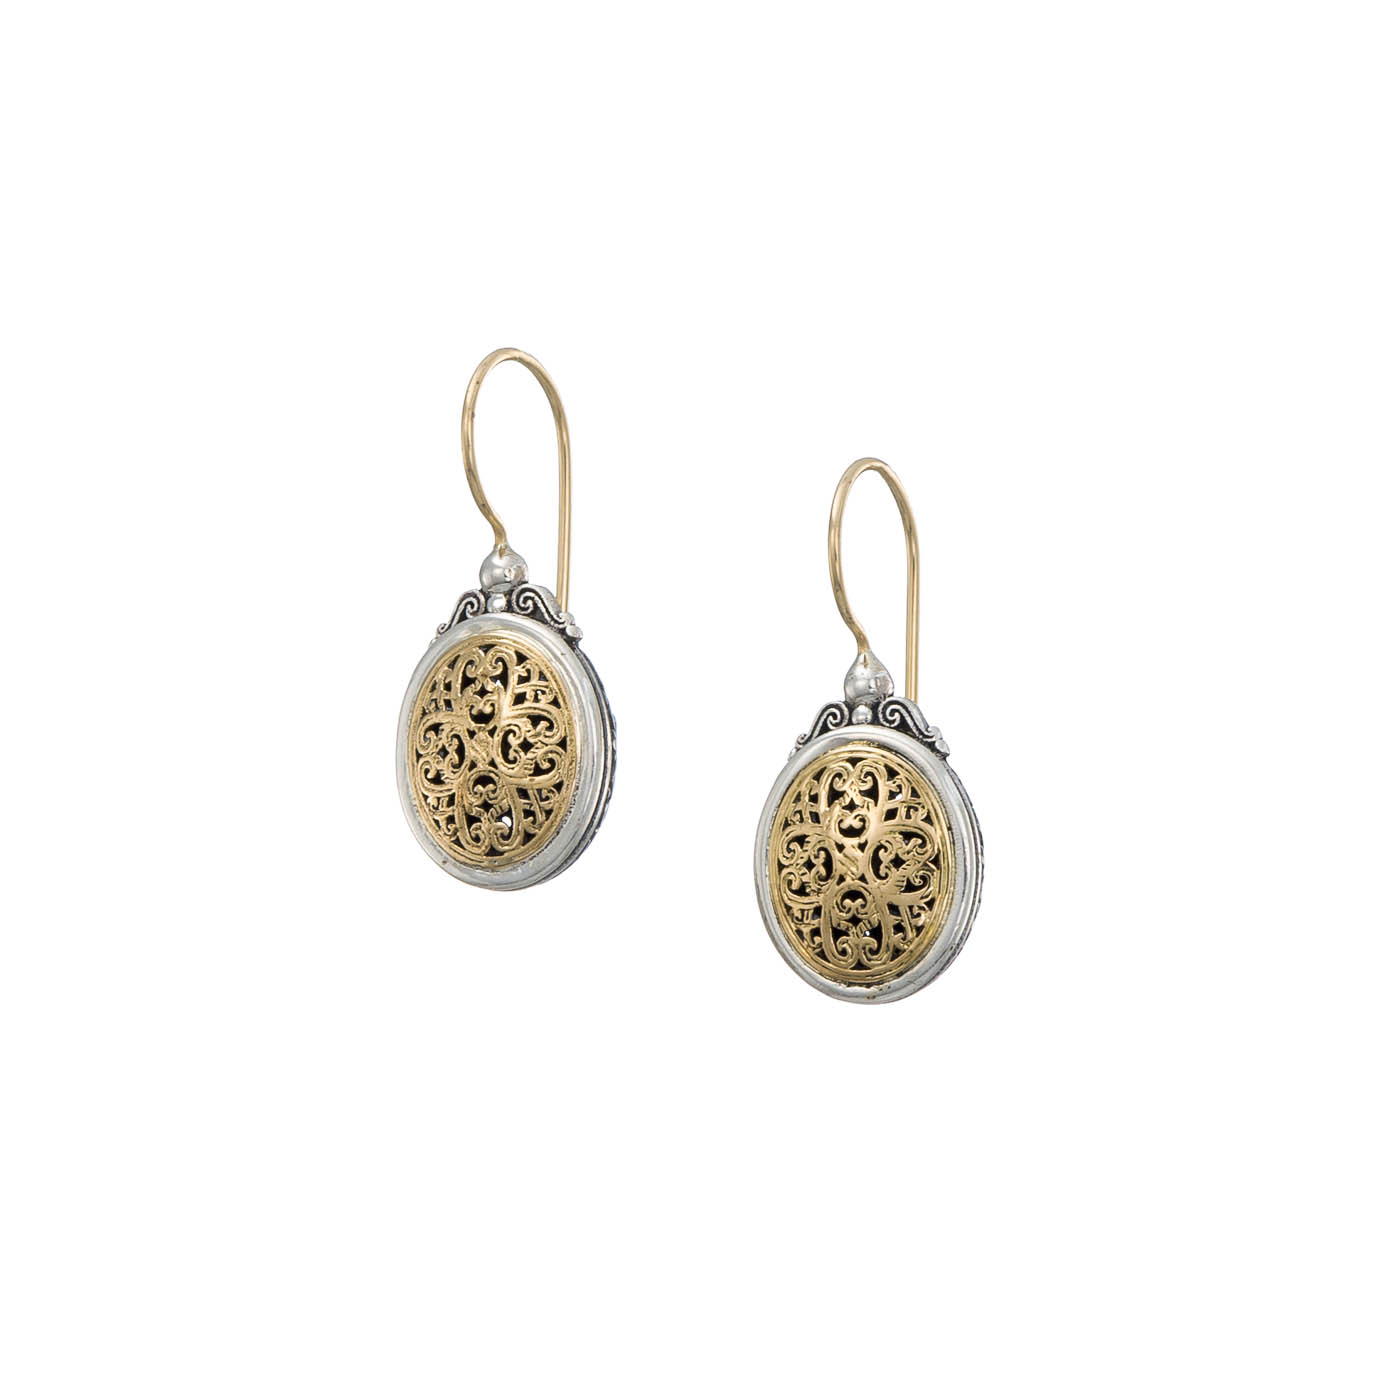 Mediterranean small oval earrings in 18K Gold and Sterling Silver